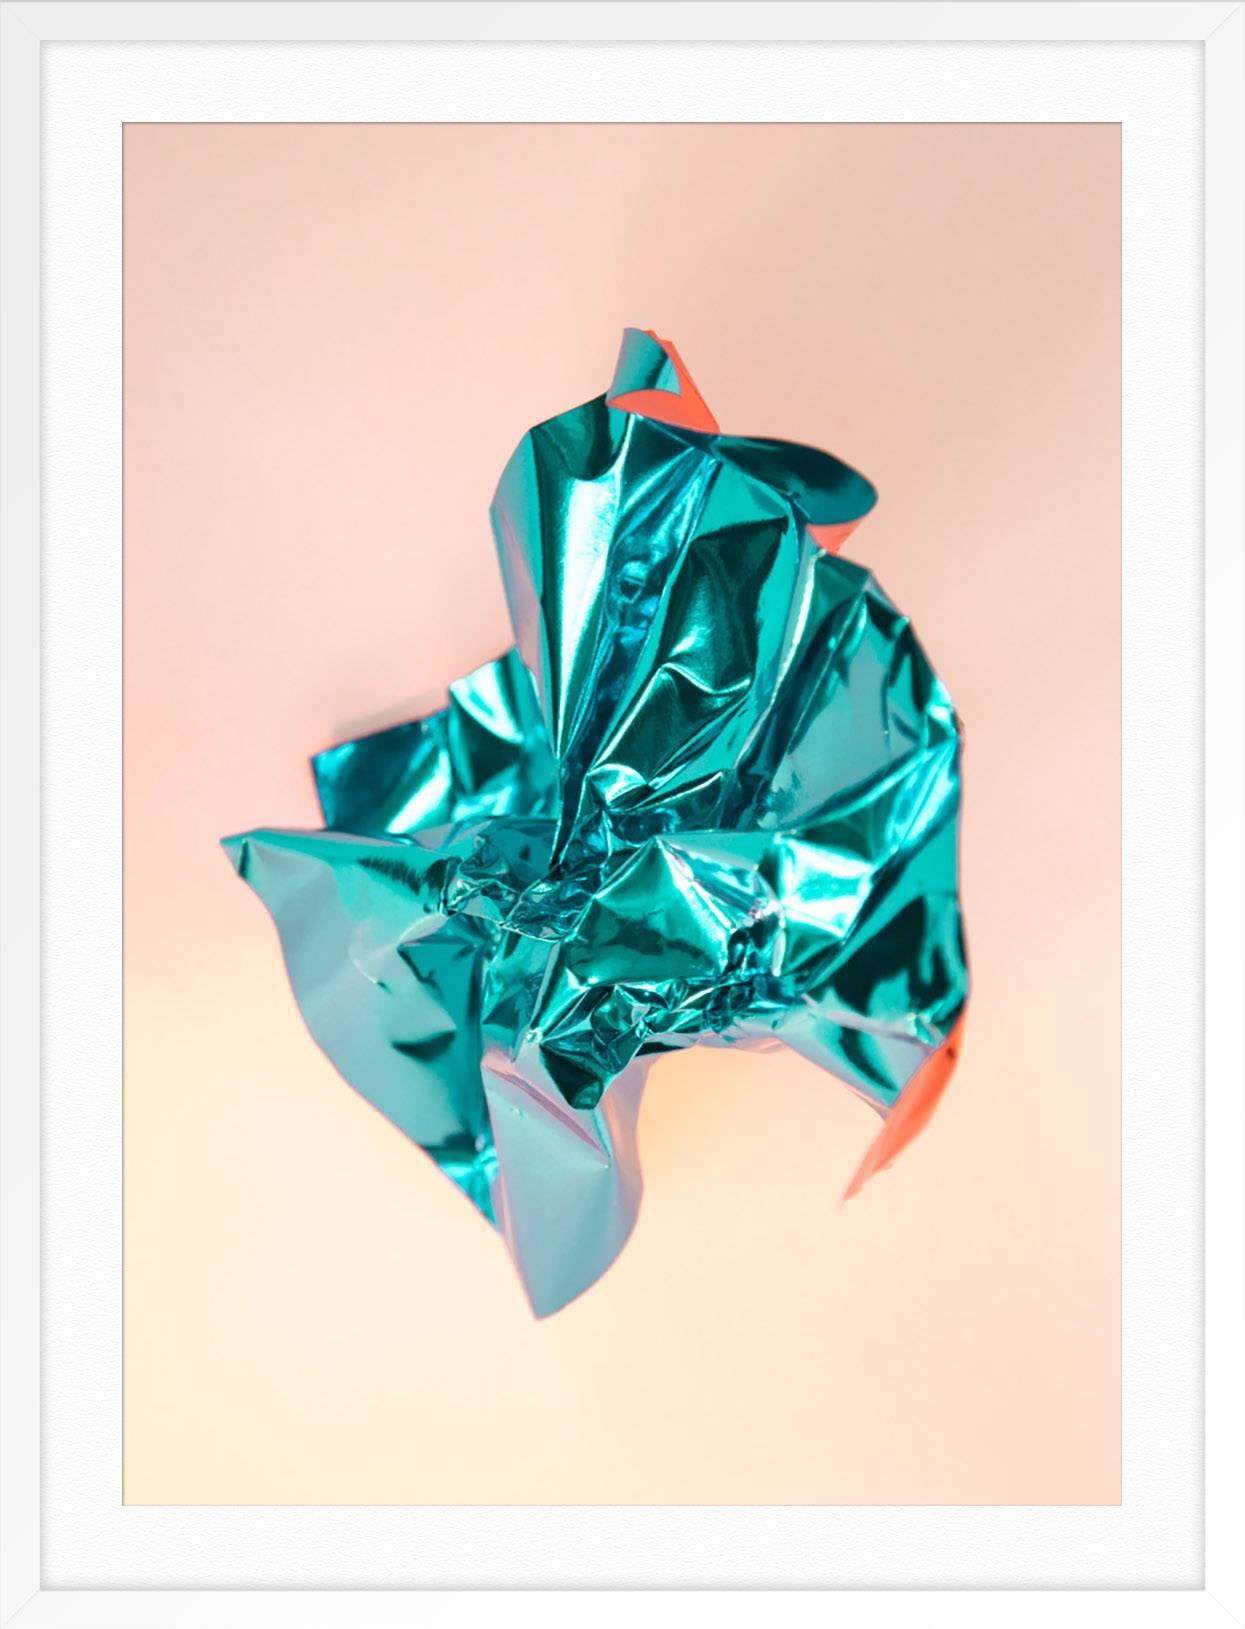 ABOUT THIS PIECE: Freeforms : Exploring form and color combinations in a series of freestanding paper foil sculptures. Using natural light I arranged foiled shapes in different positions and folds to play with the light in the most colorful way they